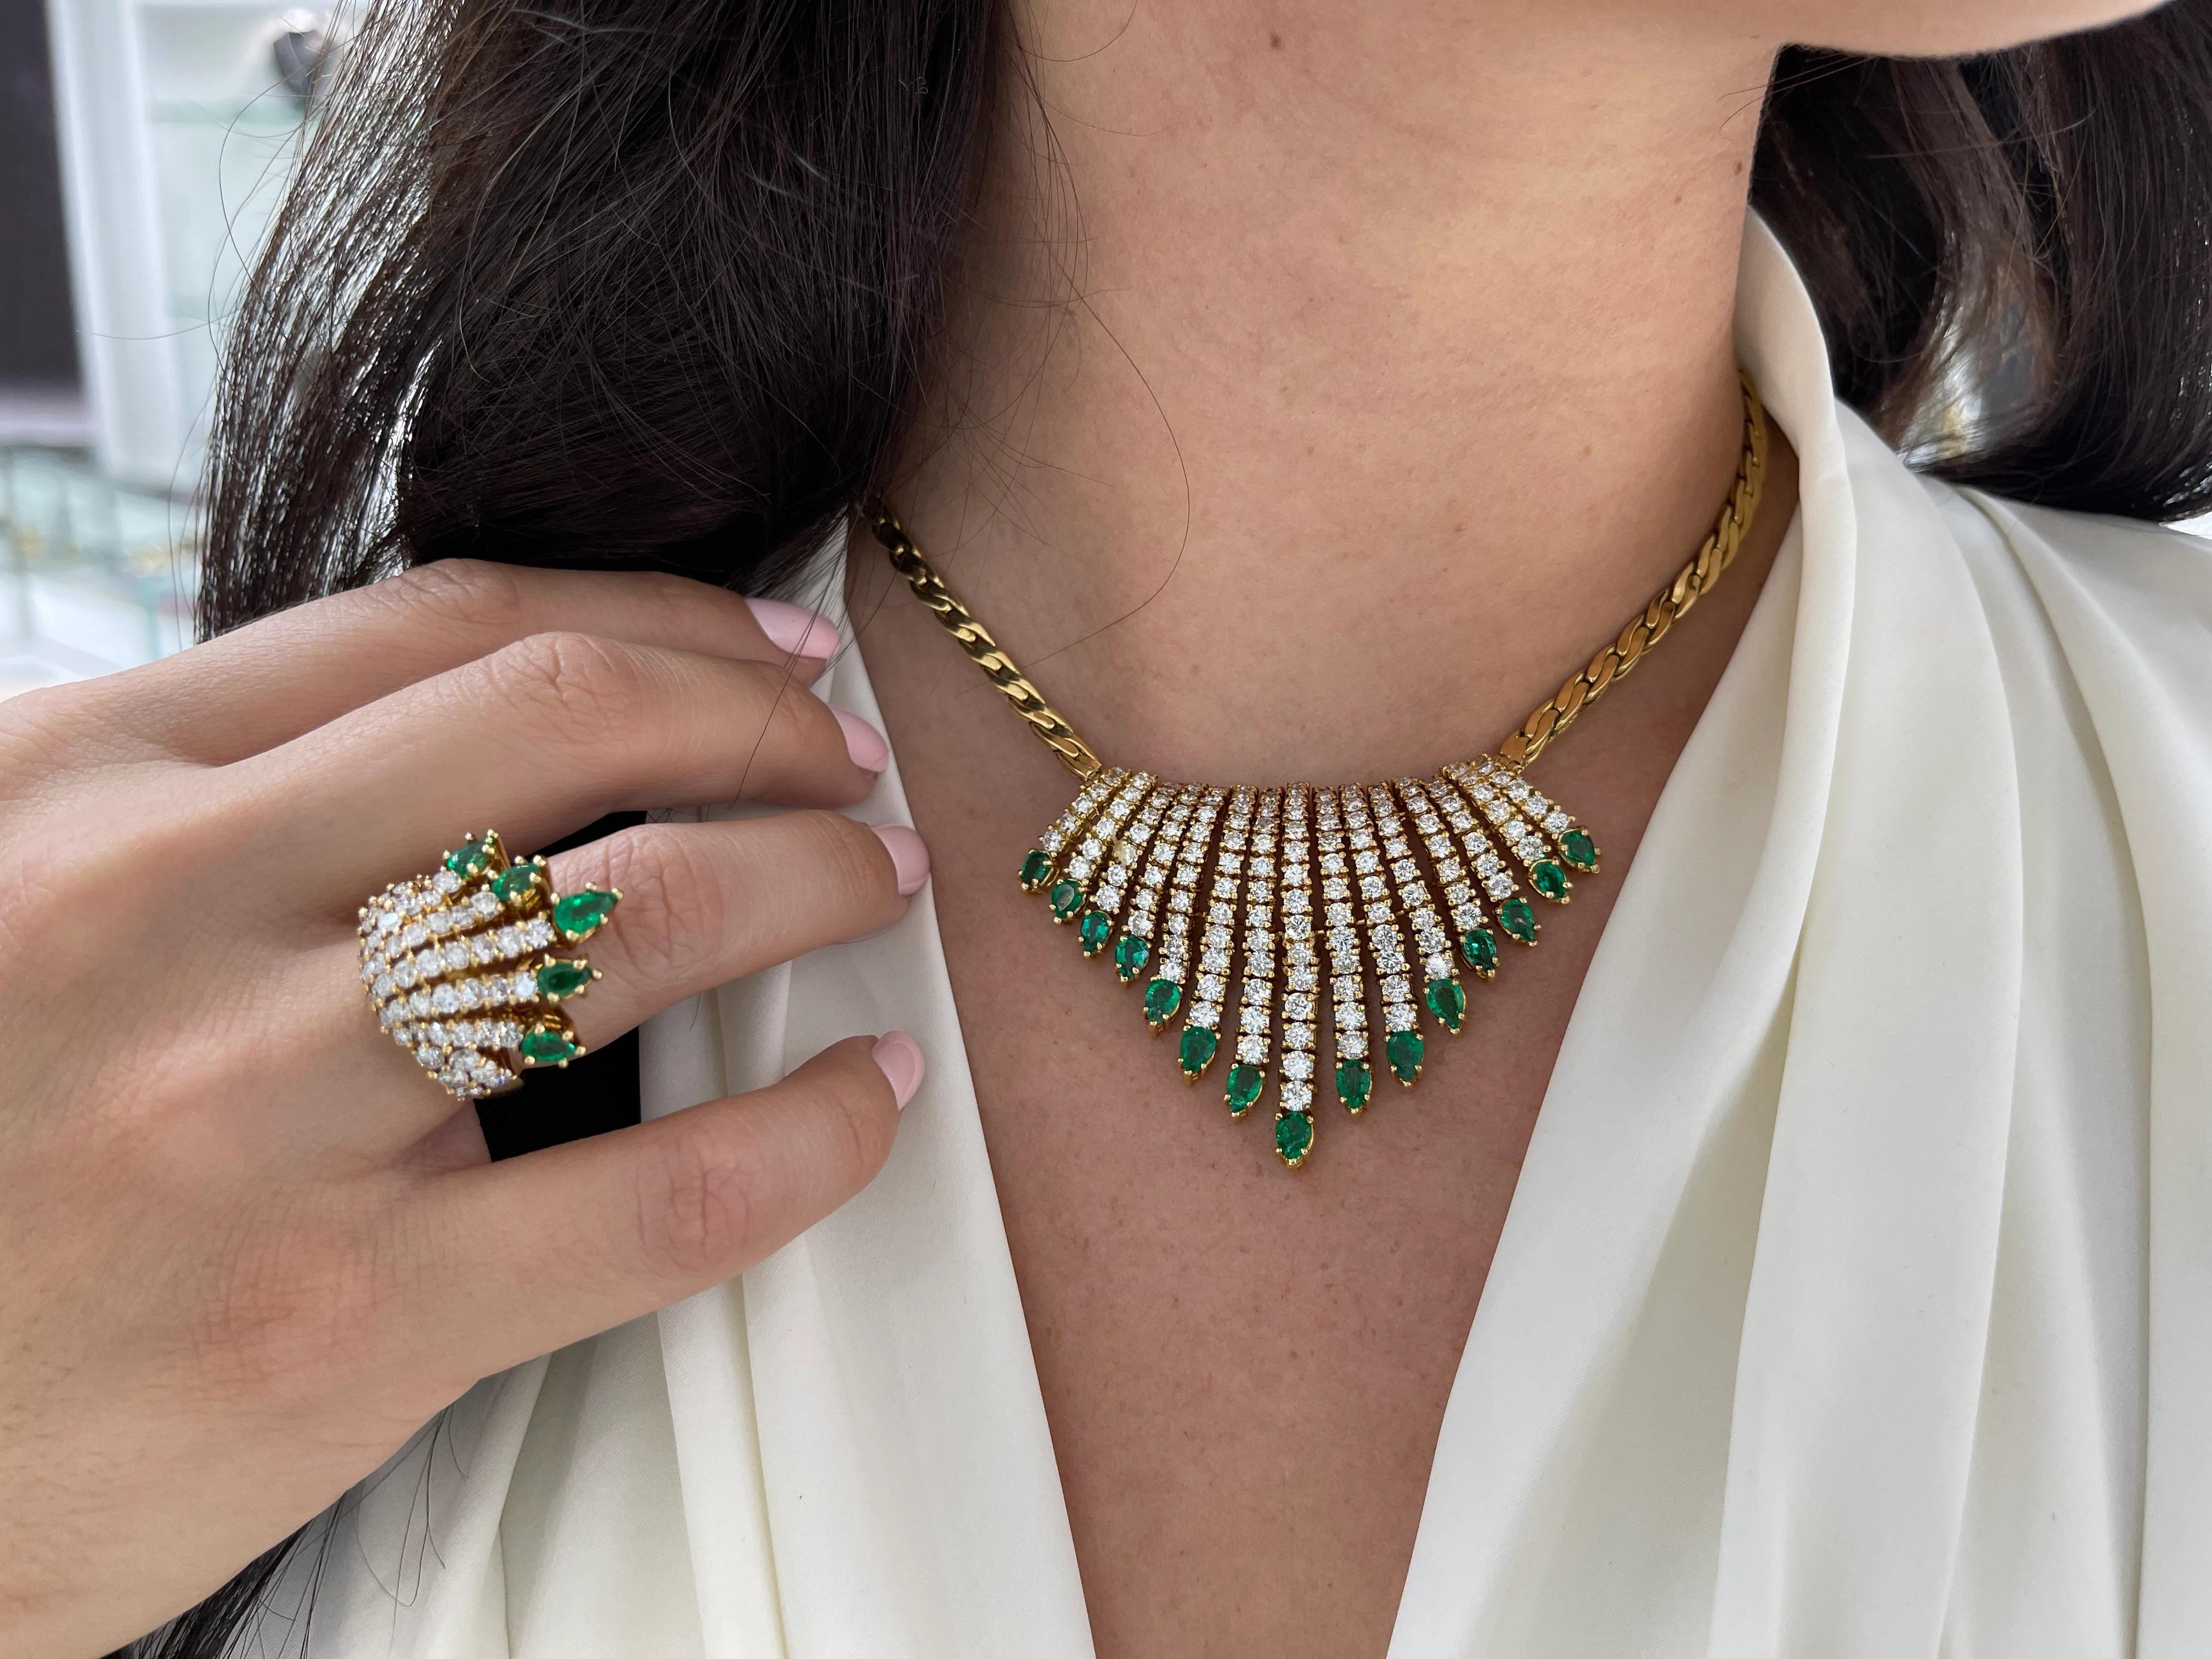 An exquisite Colombian emerald & diamond jewelry set. This necklace showcases 15 Muzo green, pear-shaped, emeralds. Each emerald is hand selected and perfectly matched. One hundred fifty-four, expertly selected brilliant round diamonds fan the